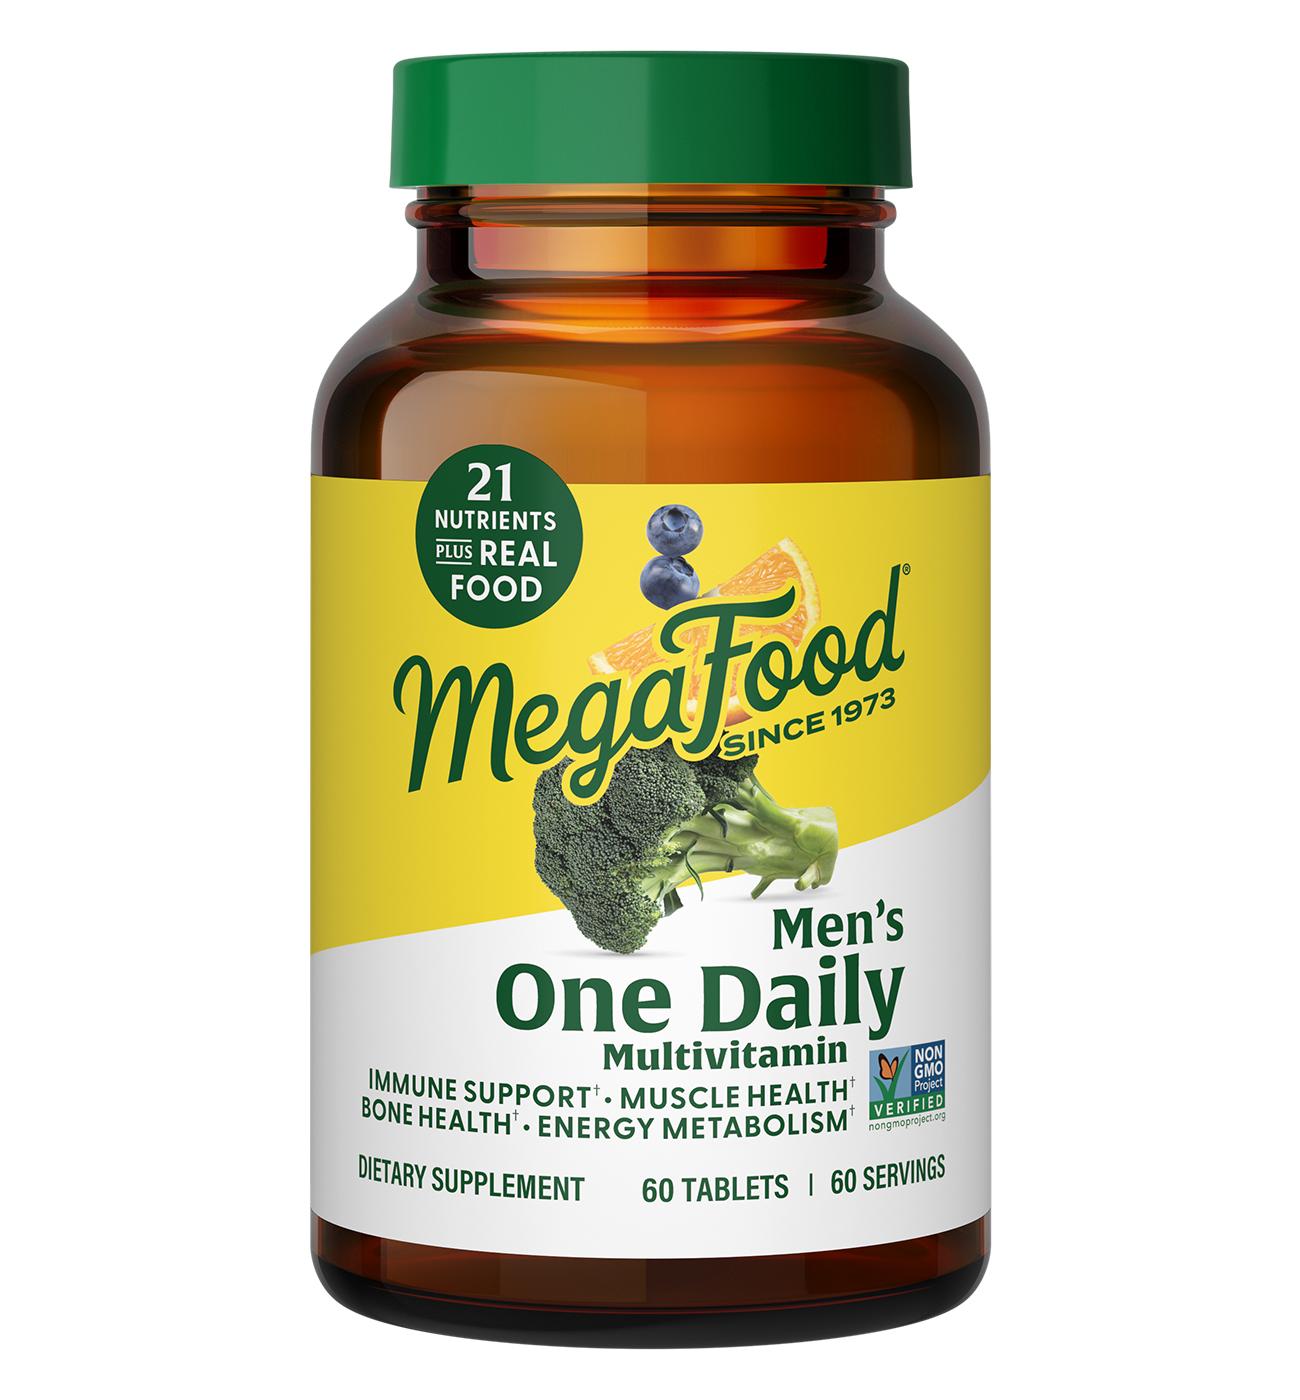 MegaFood Mens One Daily Multivitamin; image 1 of 3